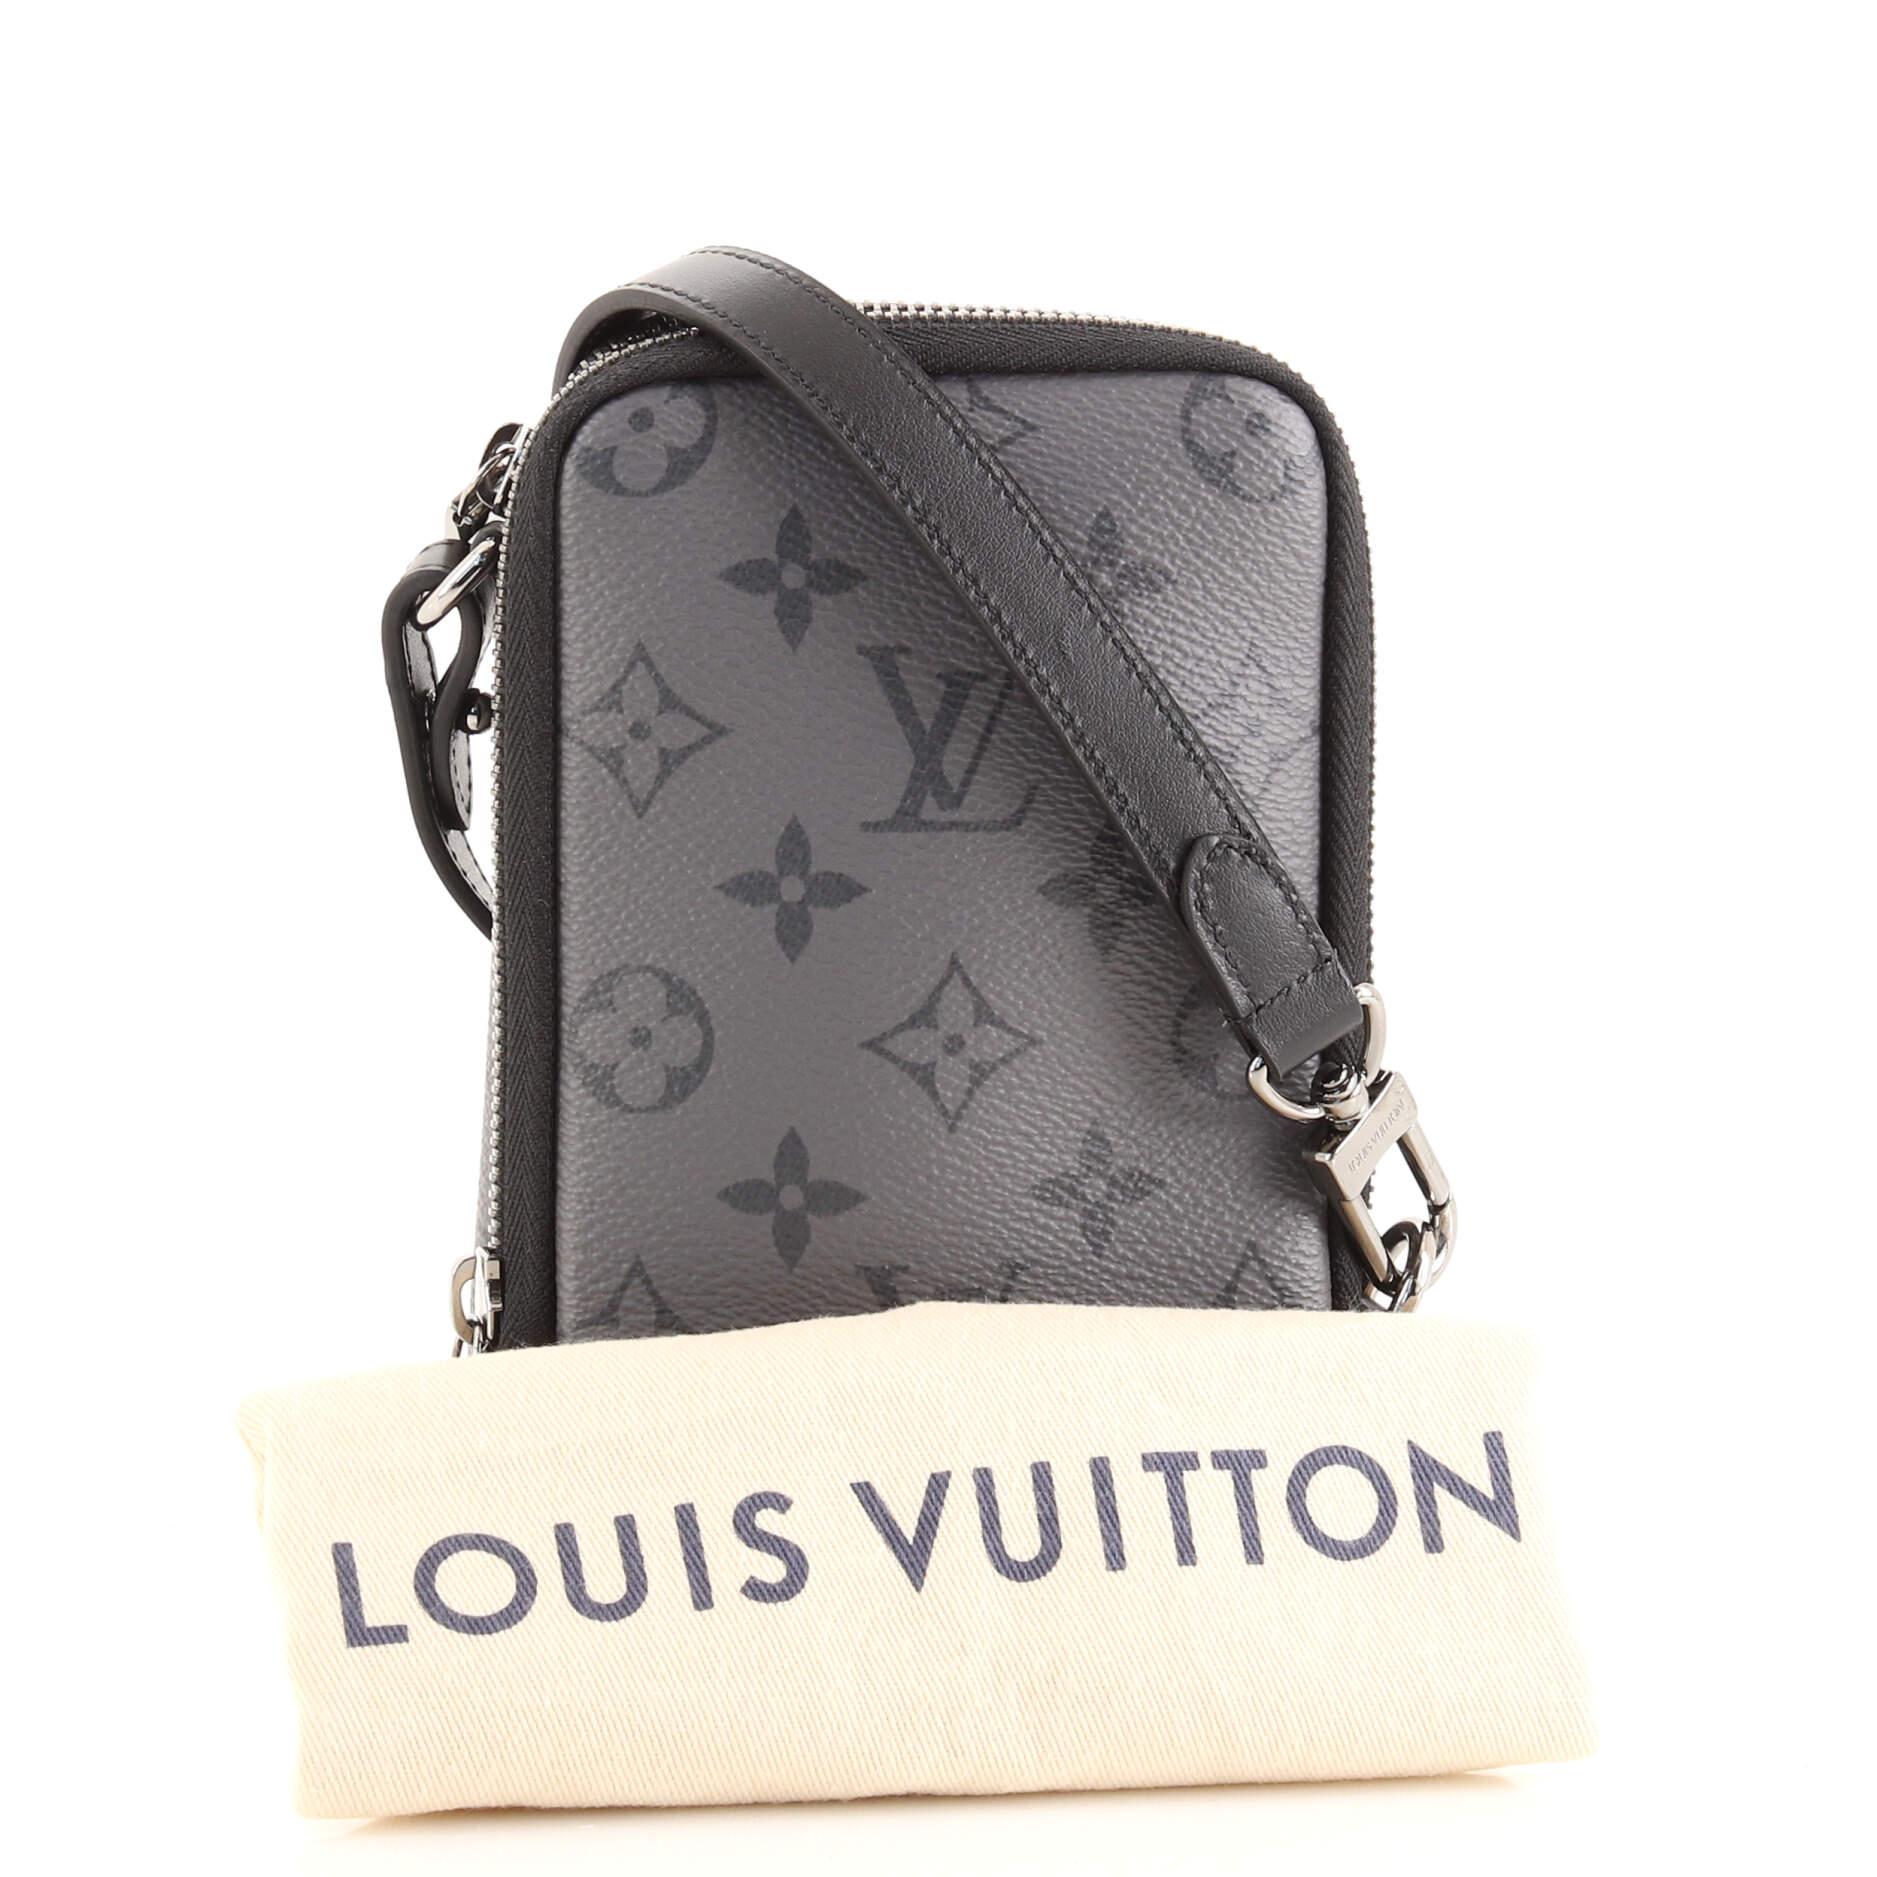 Louis Vuitton Double Phone Pouch - For Sale on 1stDibs  leather louis  vuitton phone case, louis vuitton double crossbody, louis vuitton double  pouch